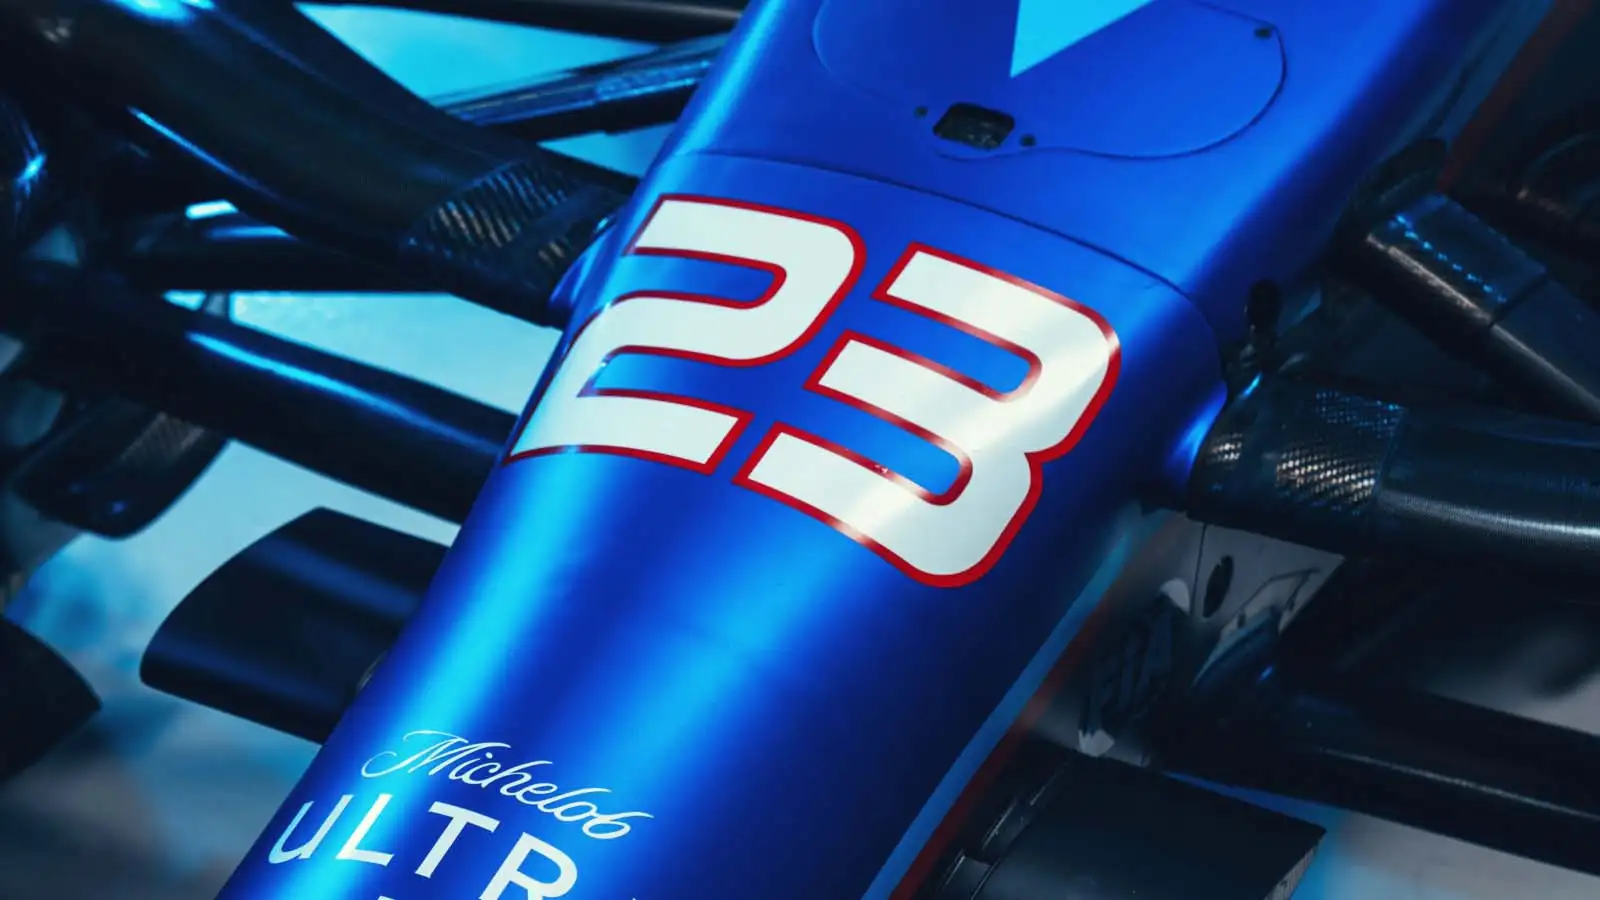 The race number of Alex Albon on the Williams FW45. February 2023.